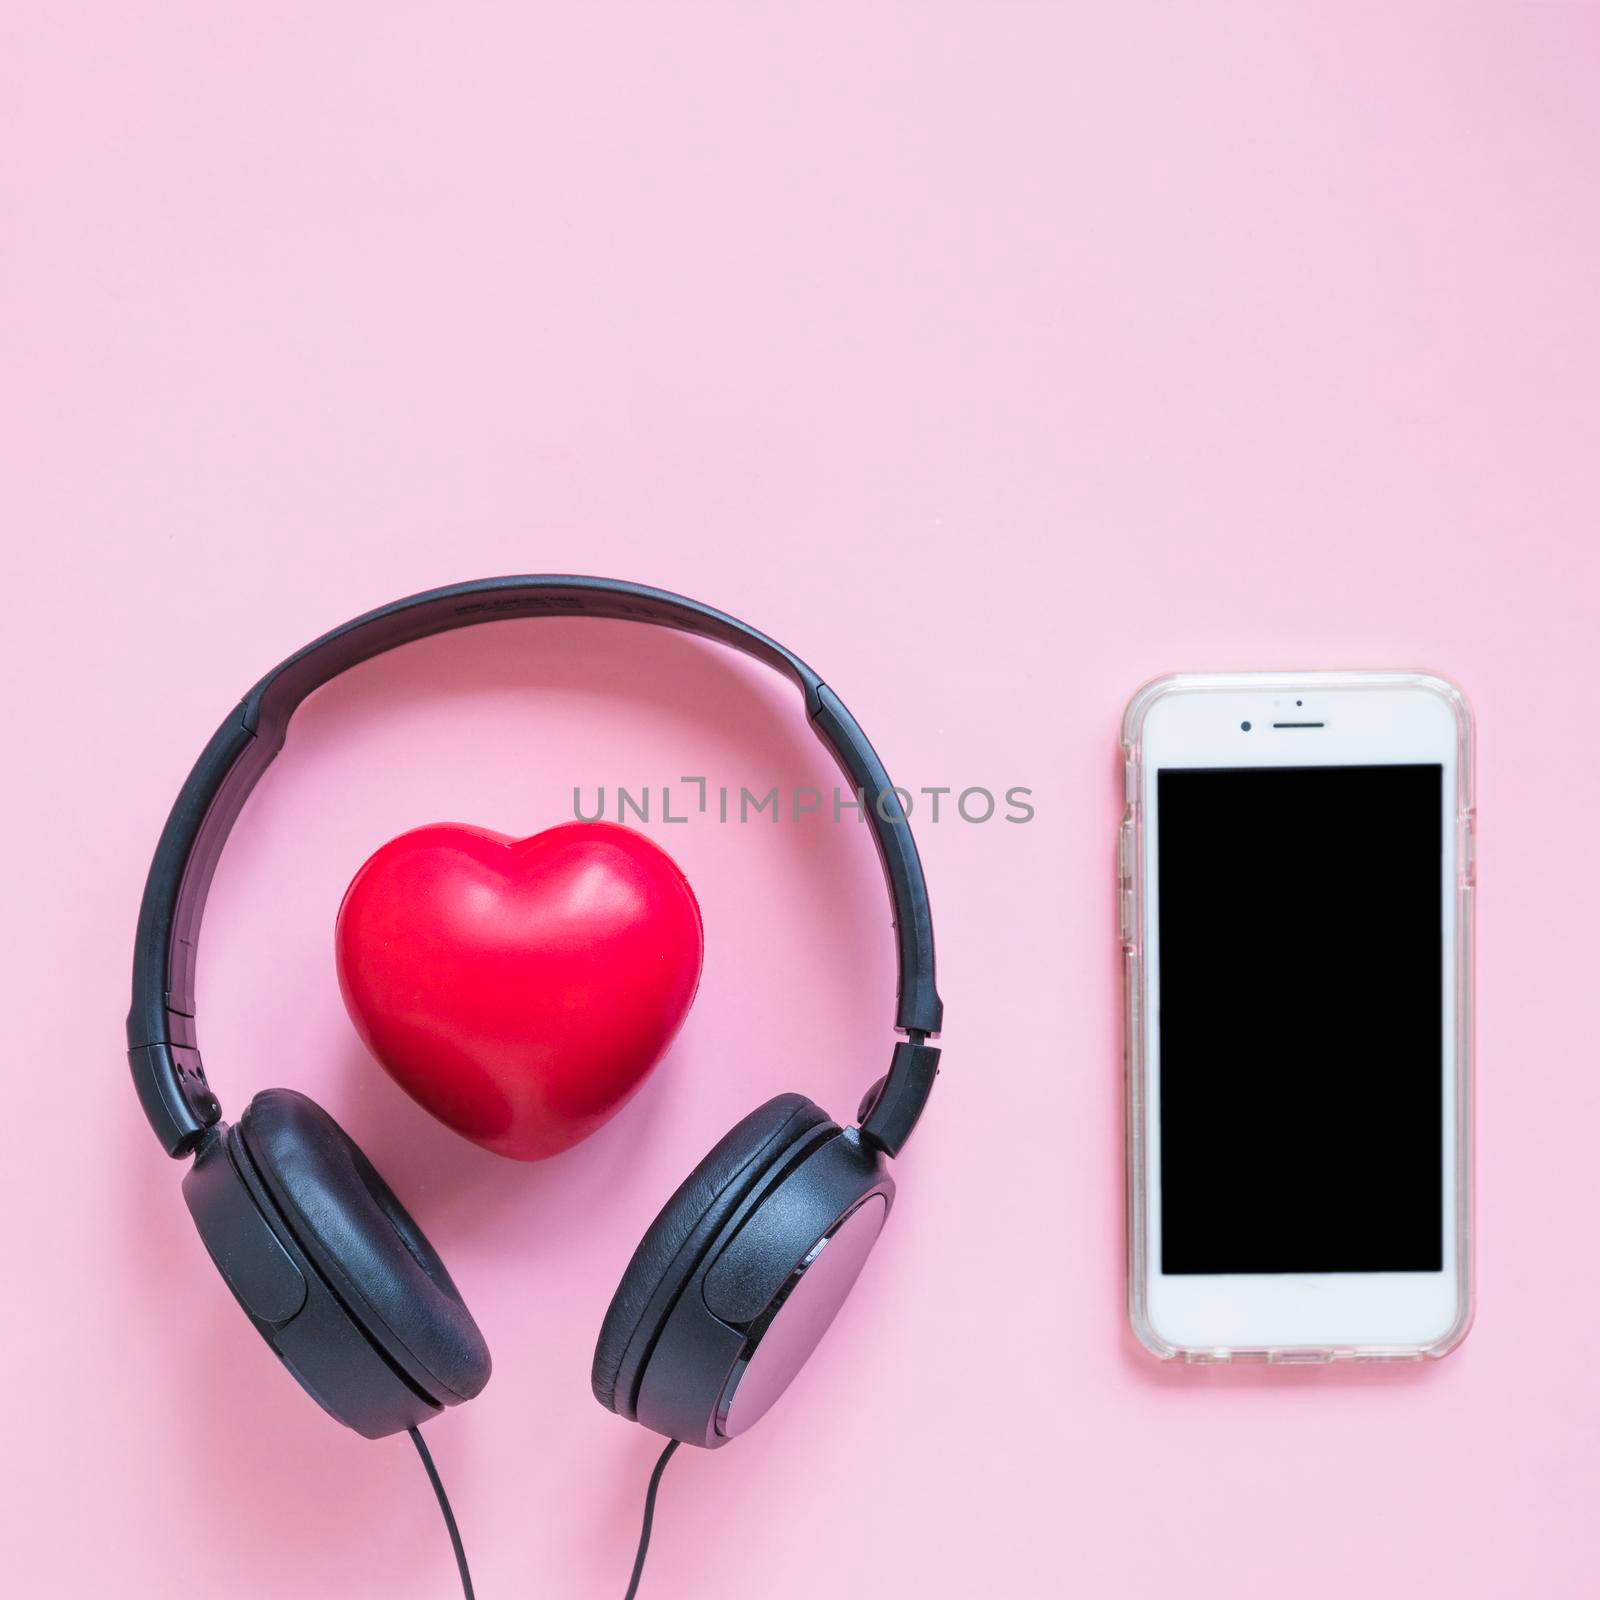 headphone around red heart shape smartphone against pink backdrop by Zahard